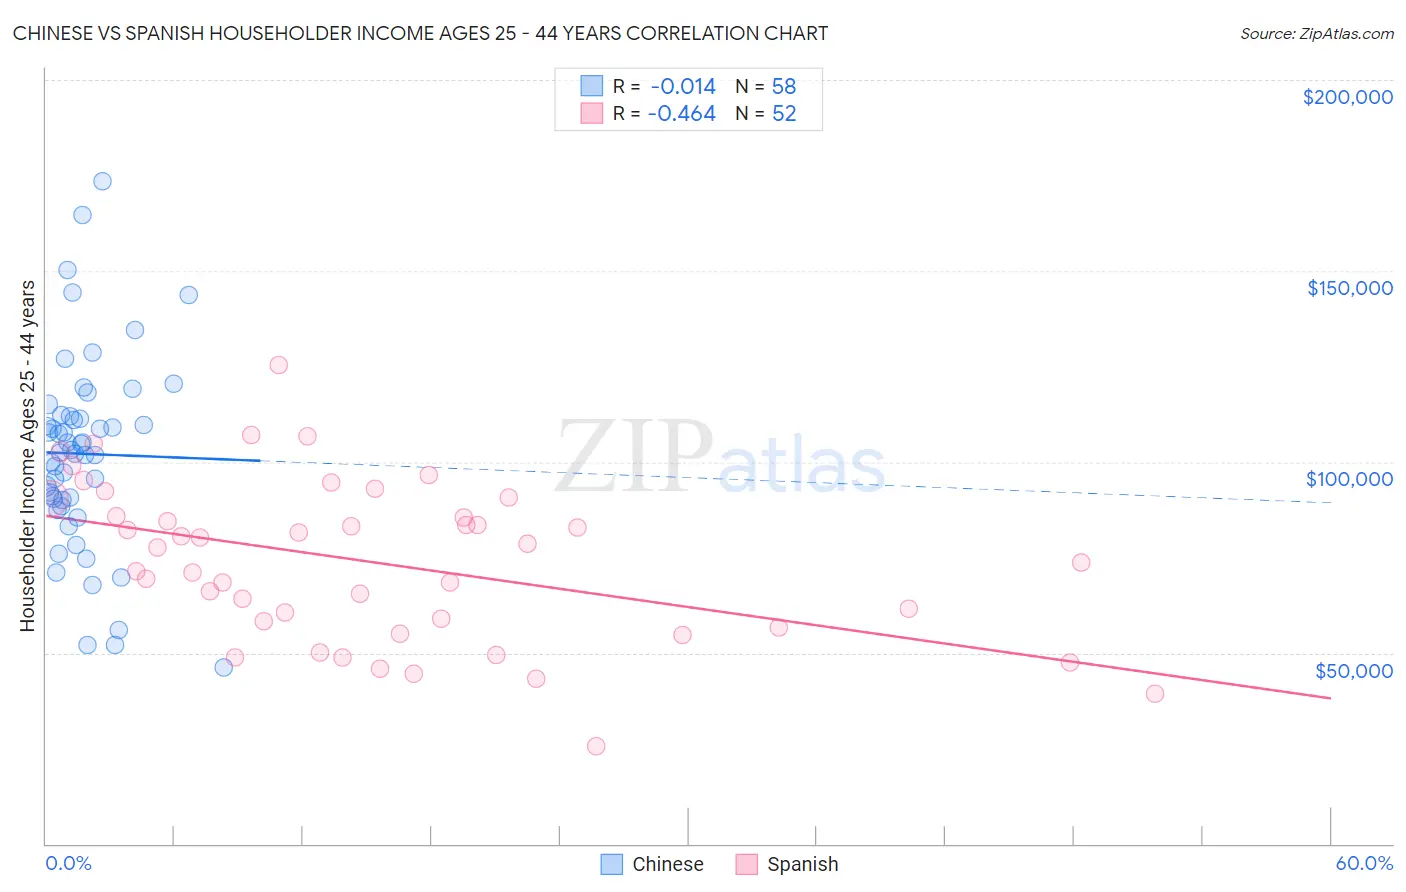 Chinese vs Spanish Householder Income Ages 25 - 44 years